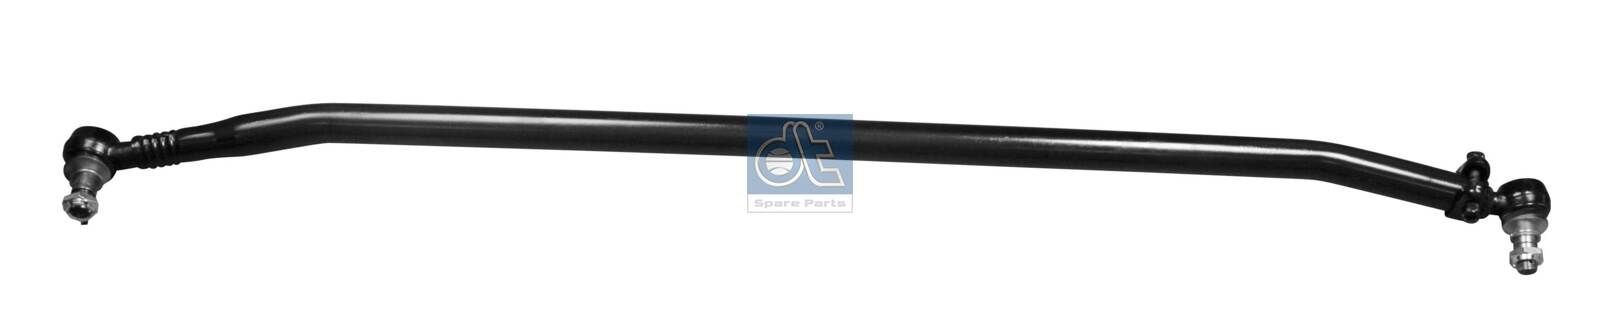 DT Spare Parts 6.53004 Rod Assembly 5010439021